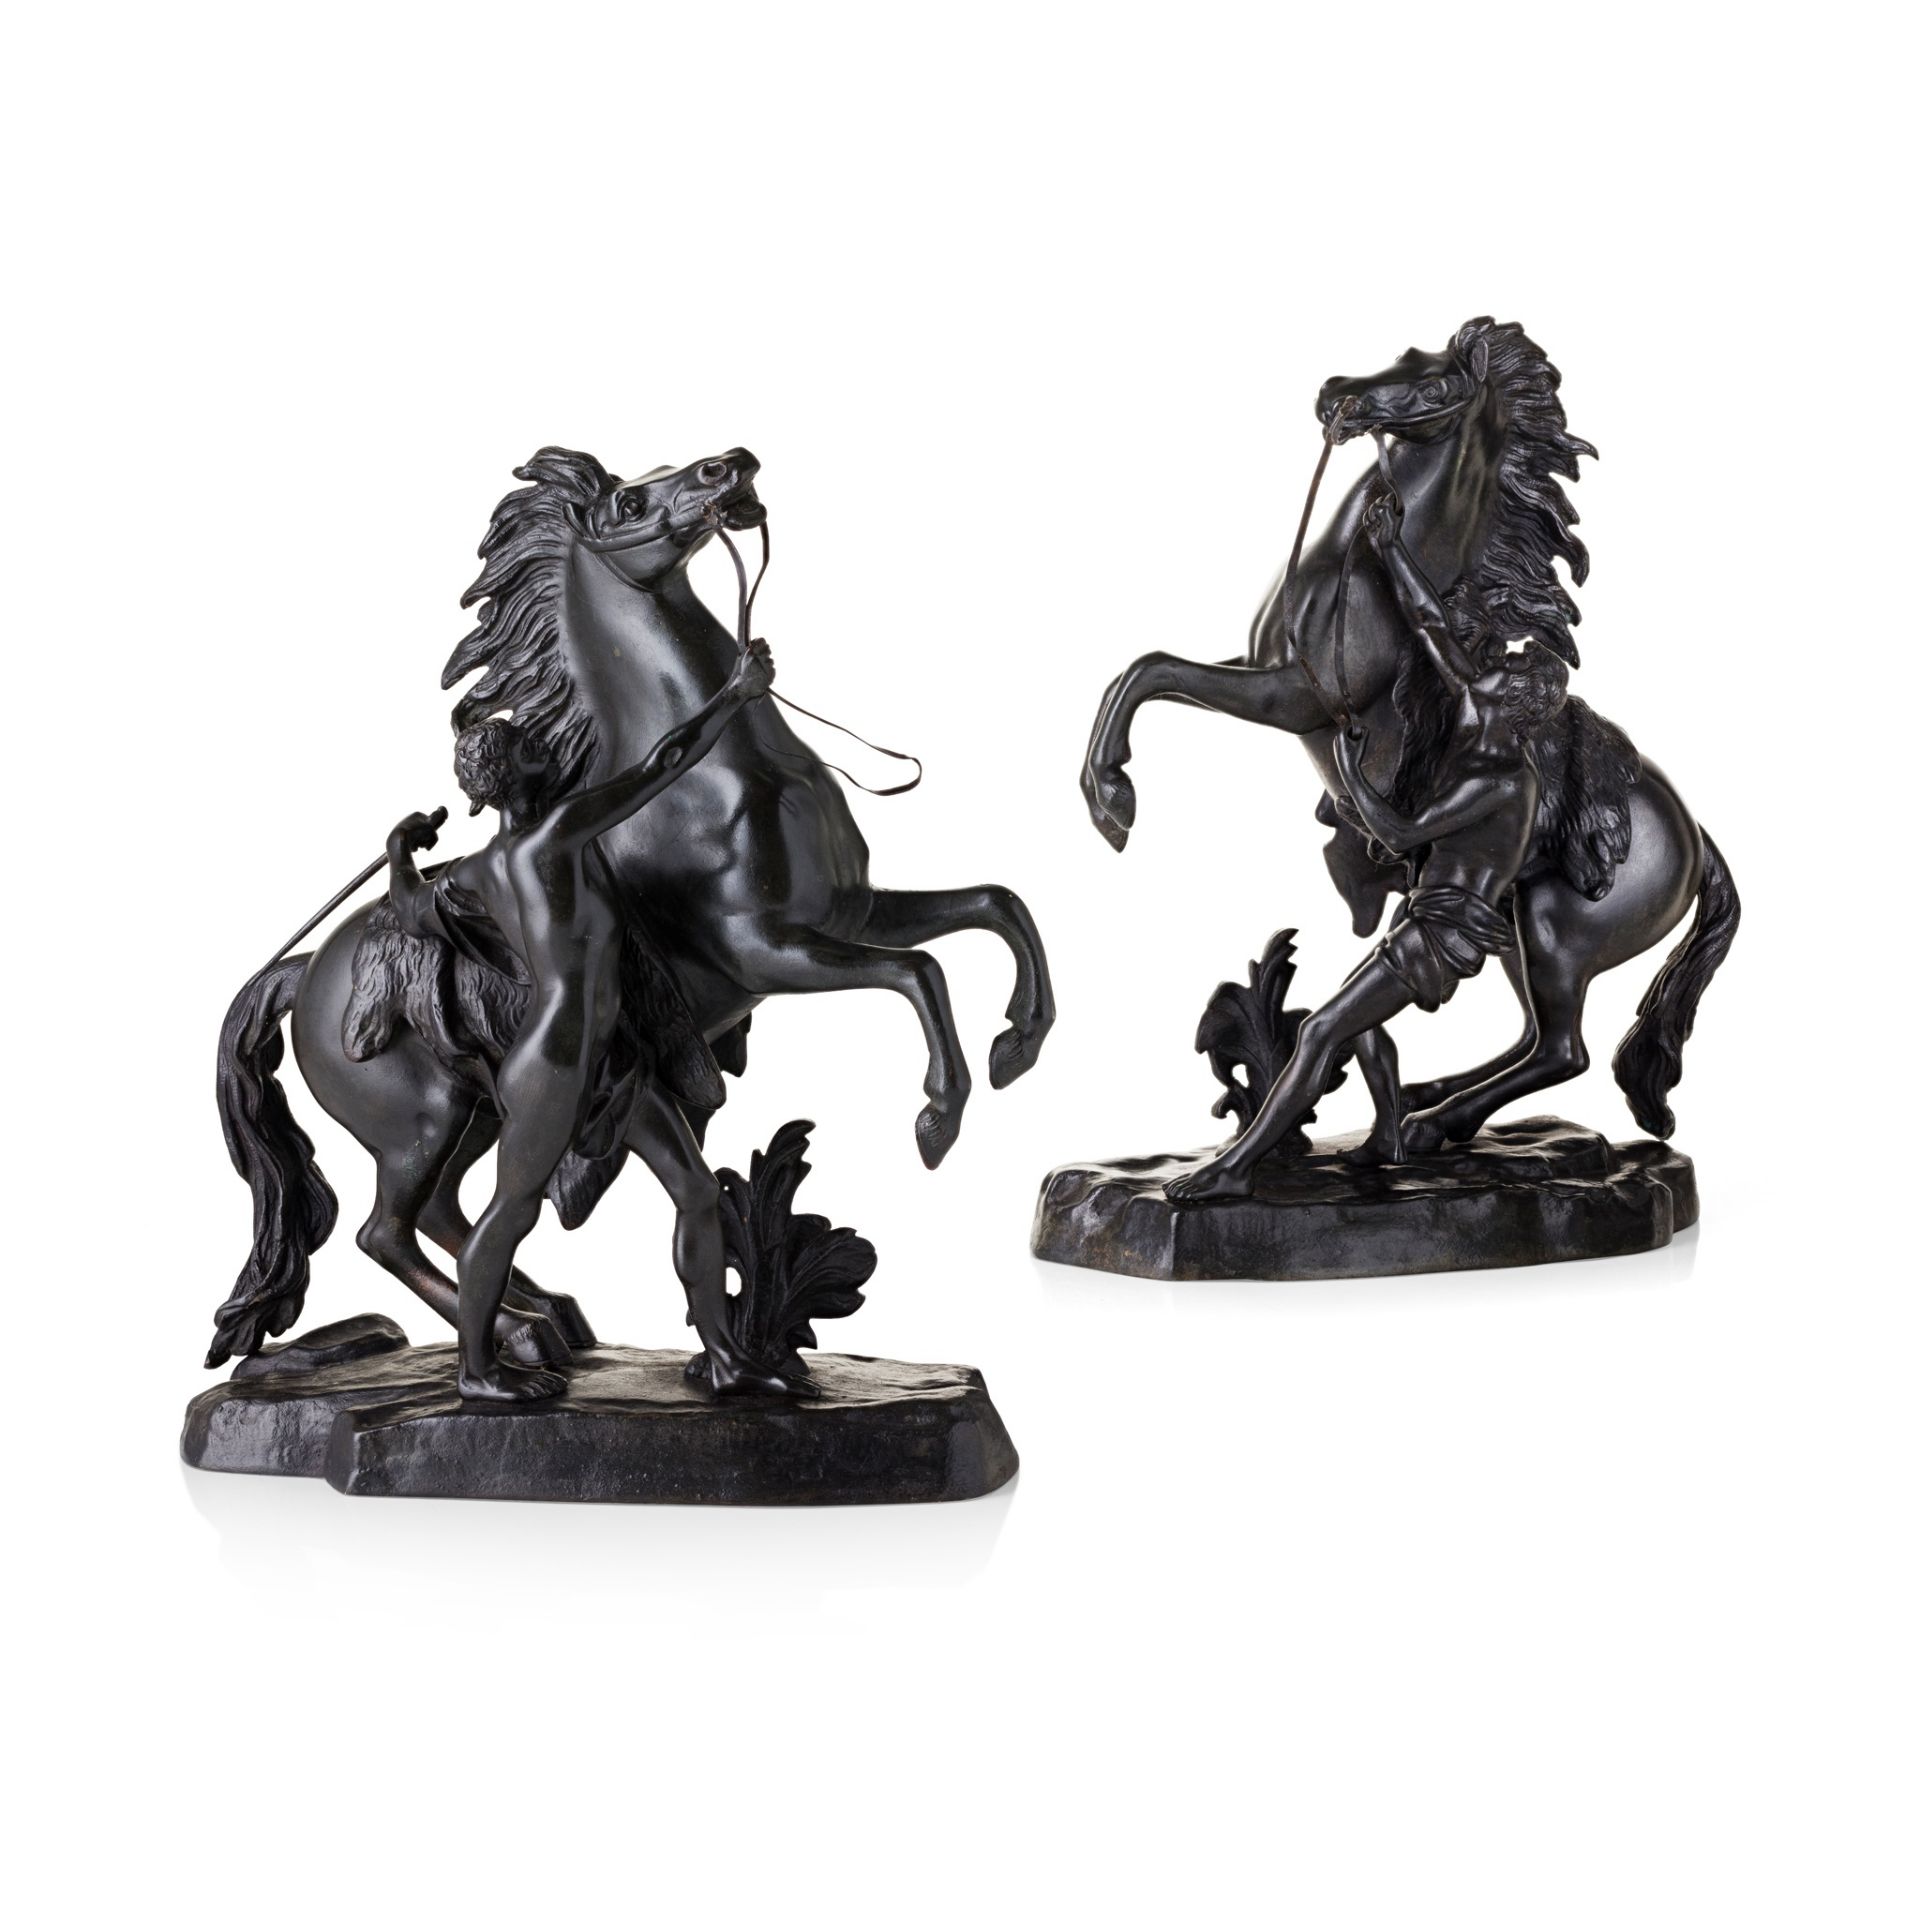 PAIR OF FRENCH BRONZE MARLEY HORSE FIGURES, AFTER COUSTOU 19TH CENTURY